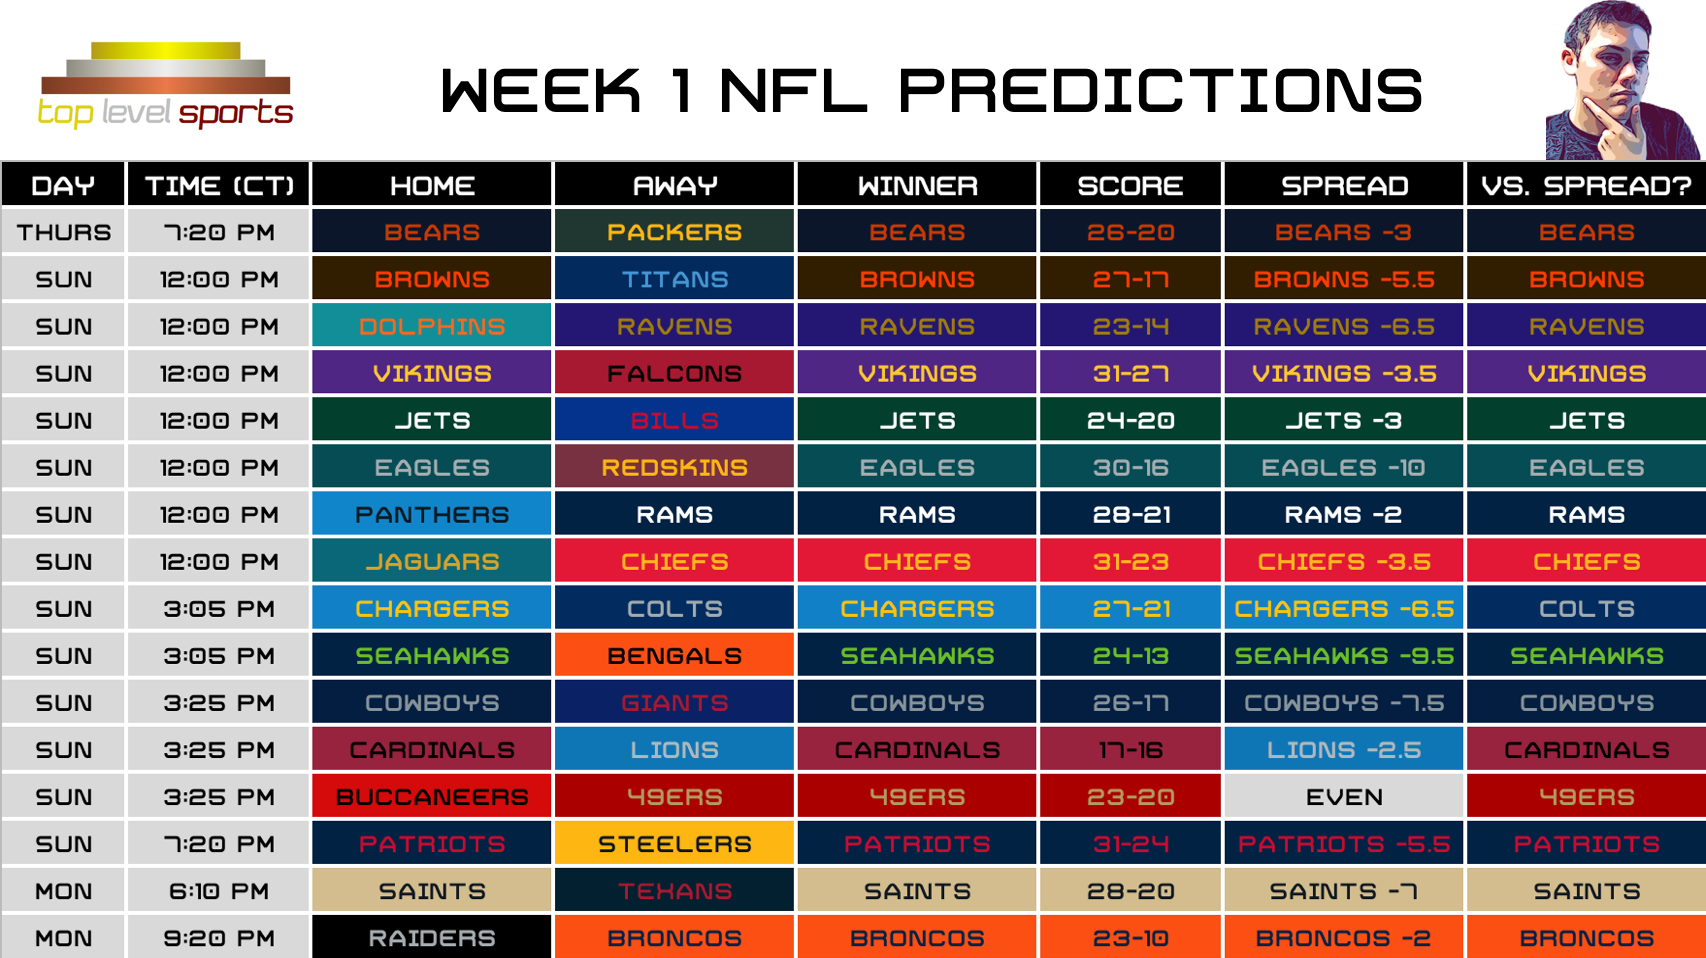 NFL Predictions: Week 1, 2019. Plus, a more detailed look at my top